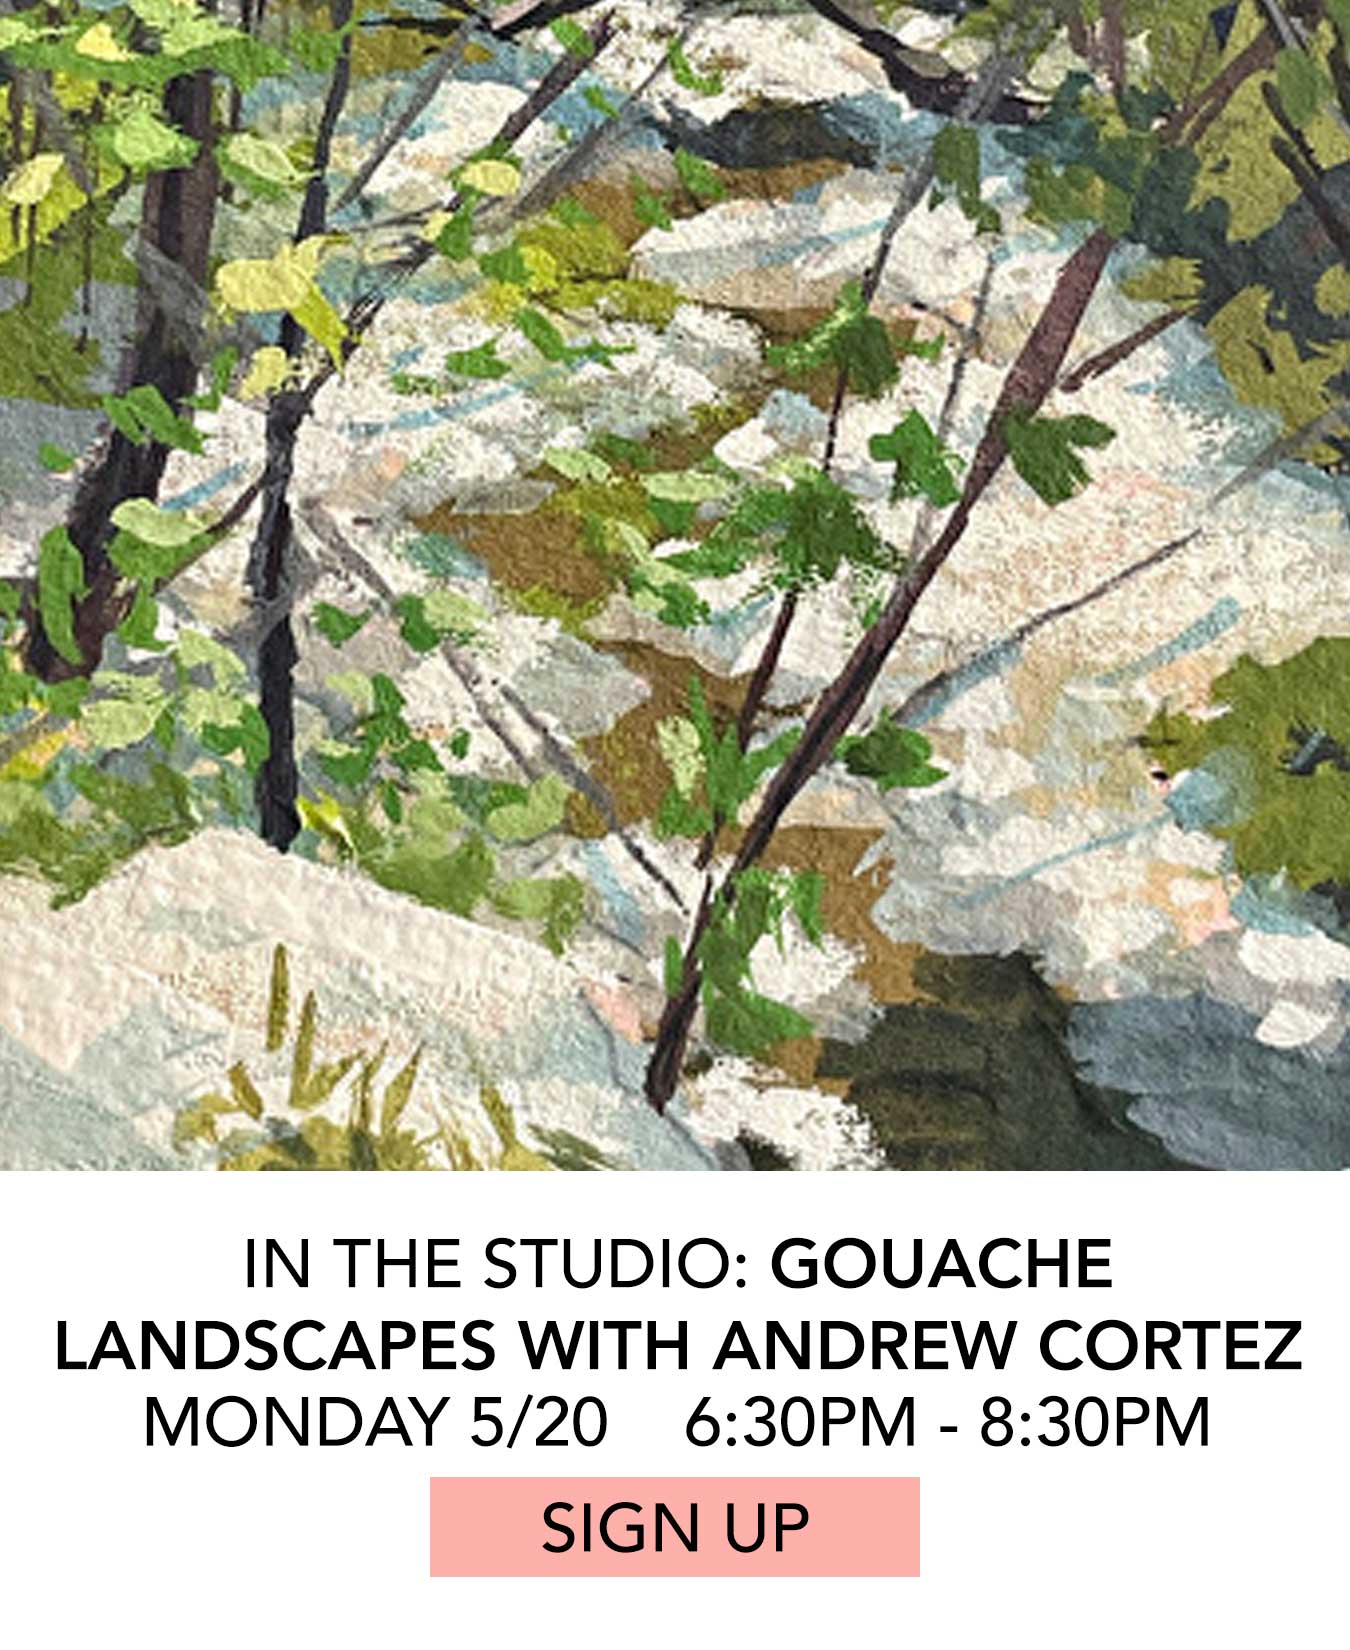 In the Studio: Gouache Landscapes with Andrew Cortez. Monday 5/20 from 6:30pm to 8:30pm. Click to Sign Up.